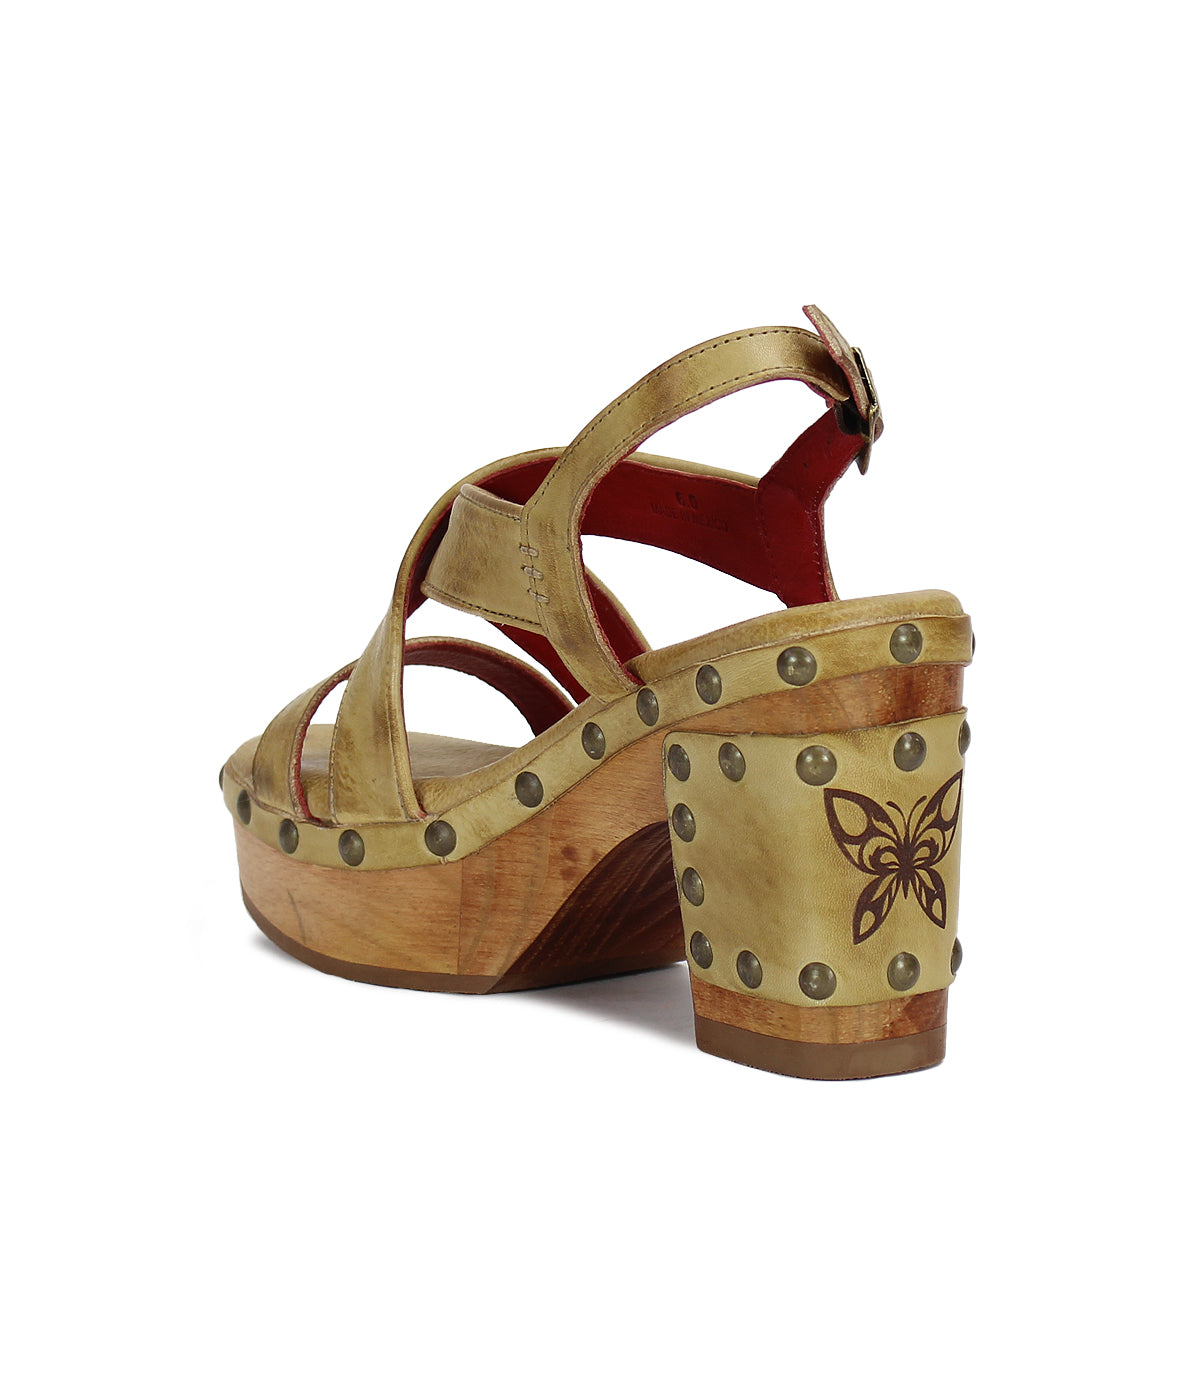 A pair of Bed Stu Mediation sandals with studs and a wooden base.